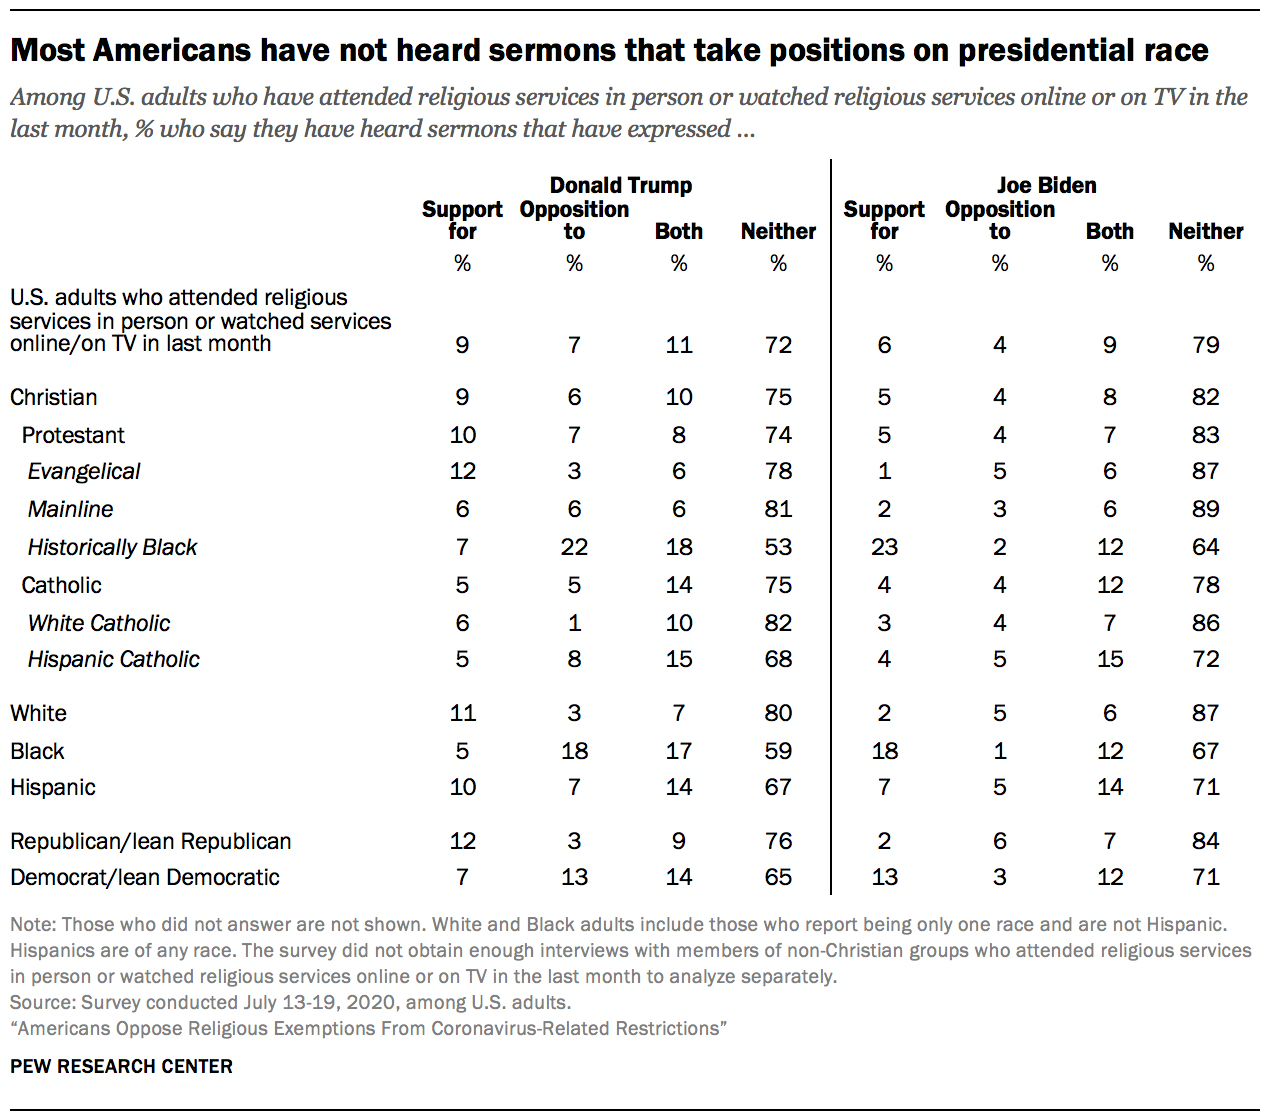 Most Americans have not heard sermons that take positions on presidential race